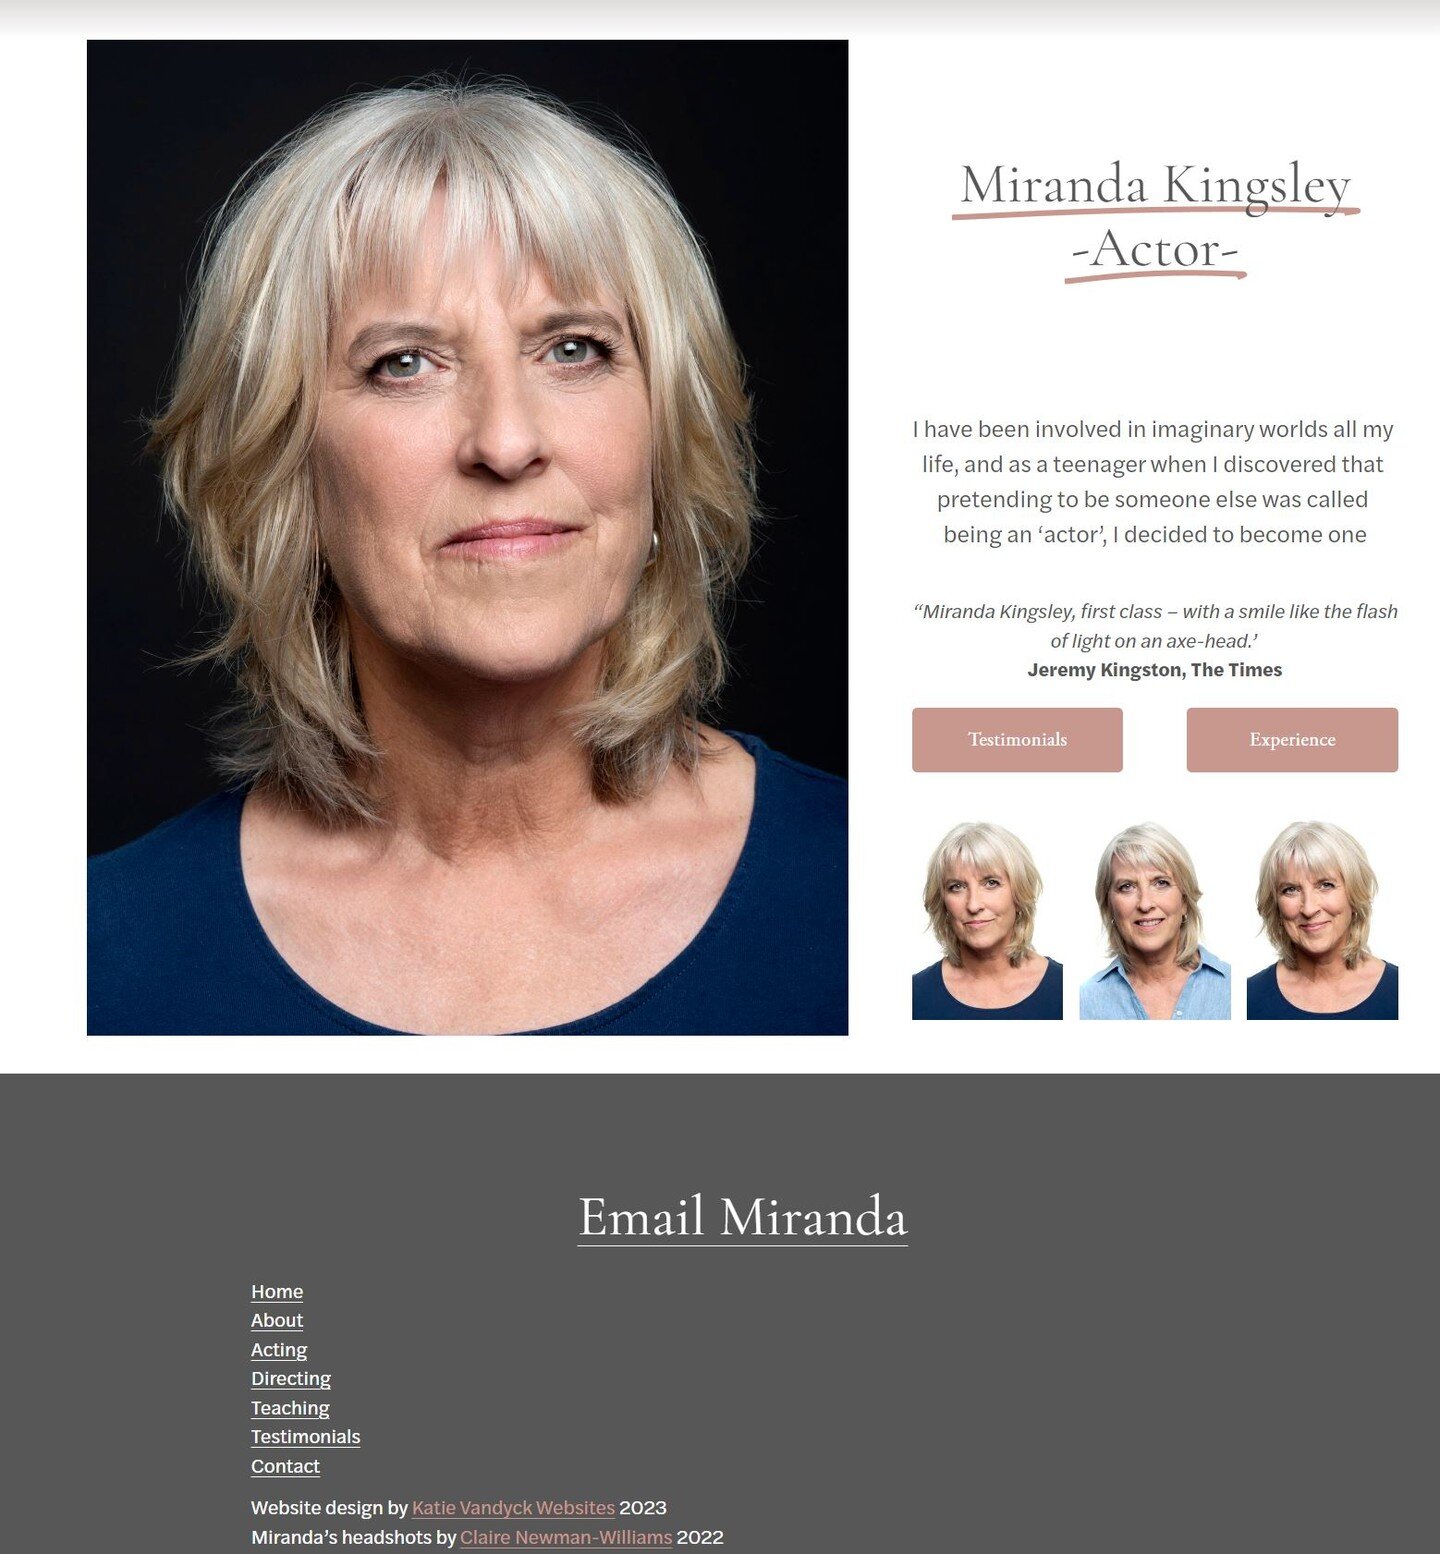 Miranda Kingsley is returning to acting, which is lucky for the acting world. Here's her new website. Casting directors, want somebody special? Go to www.mirandakingsleyactor.com #mirandakingsley @kingsley.miranda #chracteractor #comedyactor #femalec